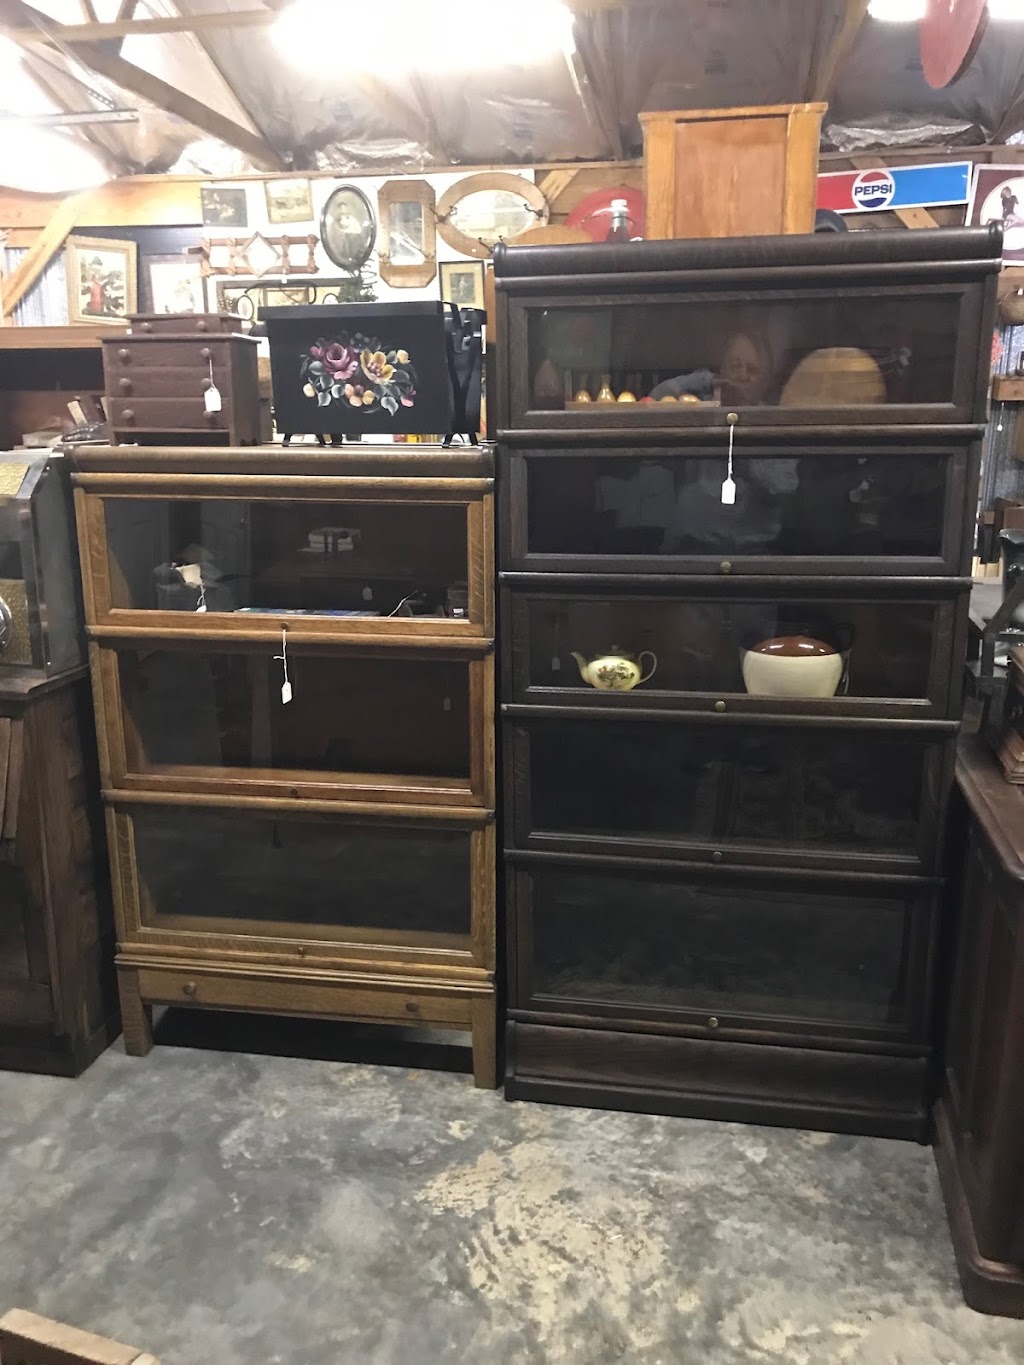 Hickory Mountain Antiques | 1921 Hadley Mill Rd #1, Pittsboro, NC 27312, USA | Phone: (919) 642-0022